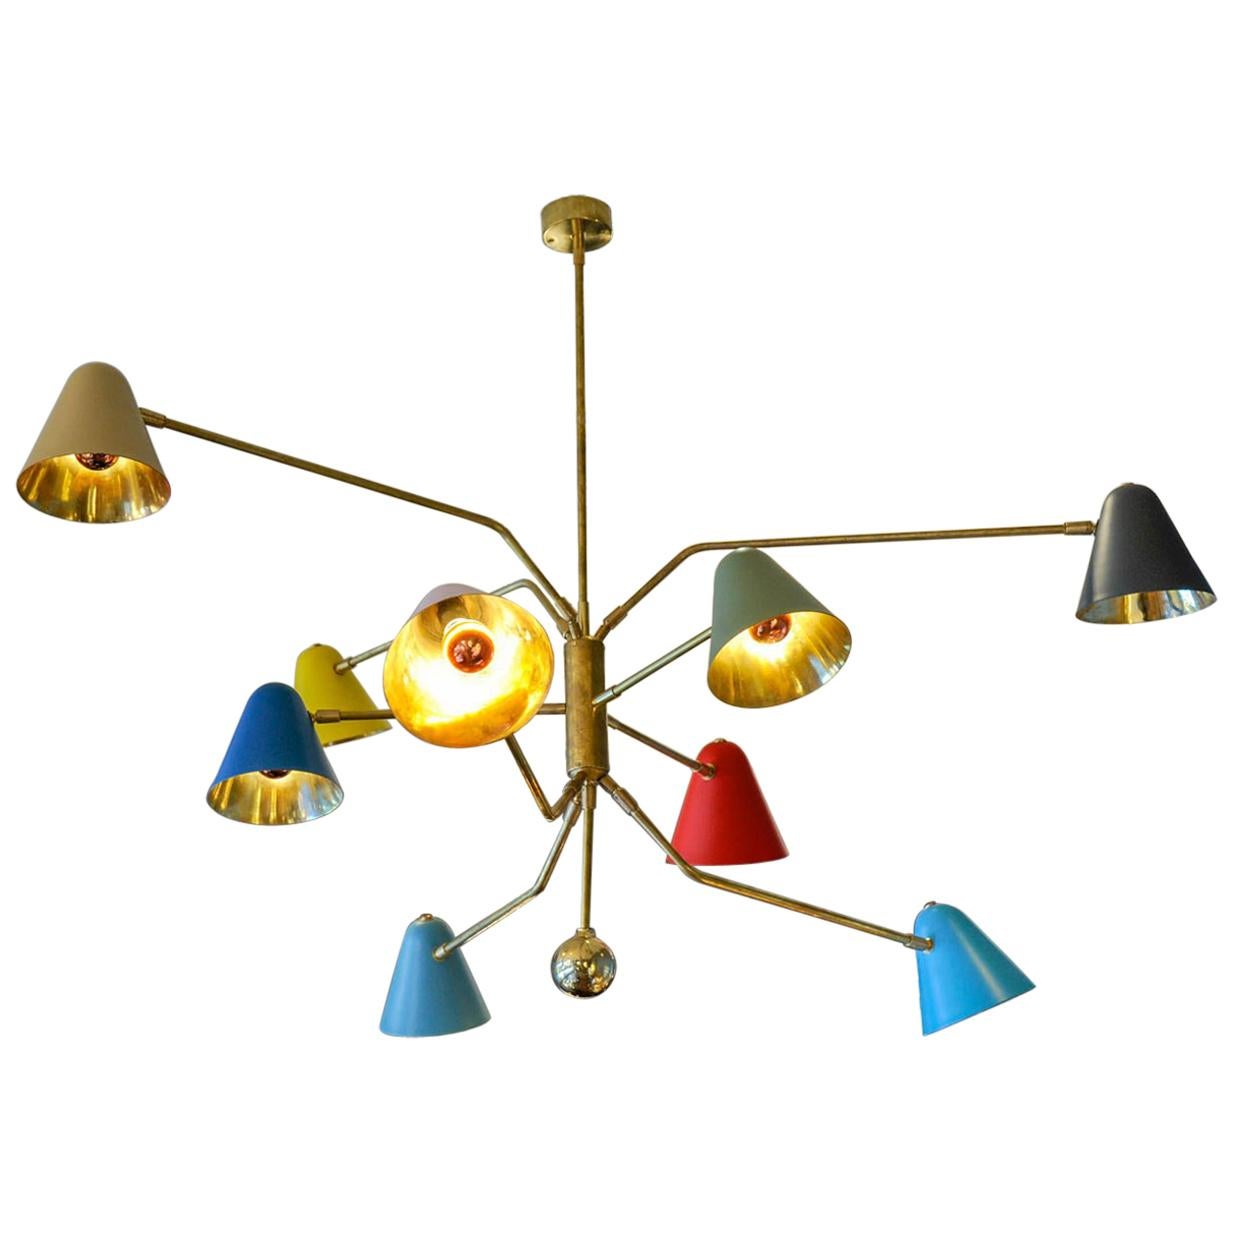 Nine Directional Arms Chandelier with Colored Sconces